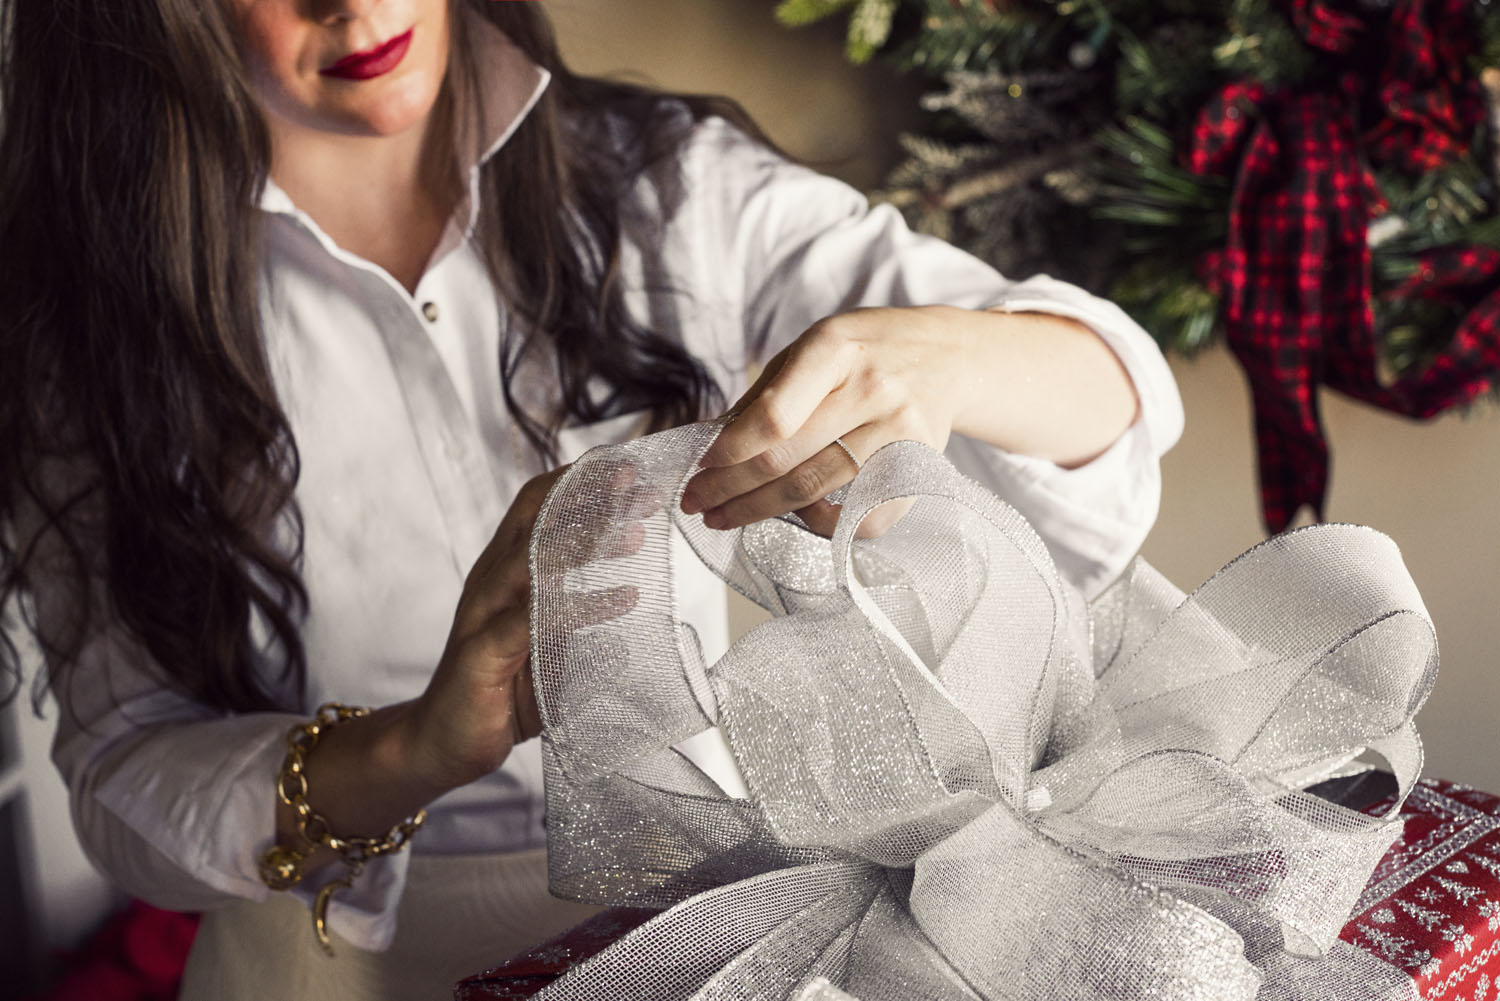 "Open this one first!" Give the gift of Nespresso this holiday season.